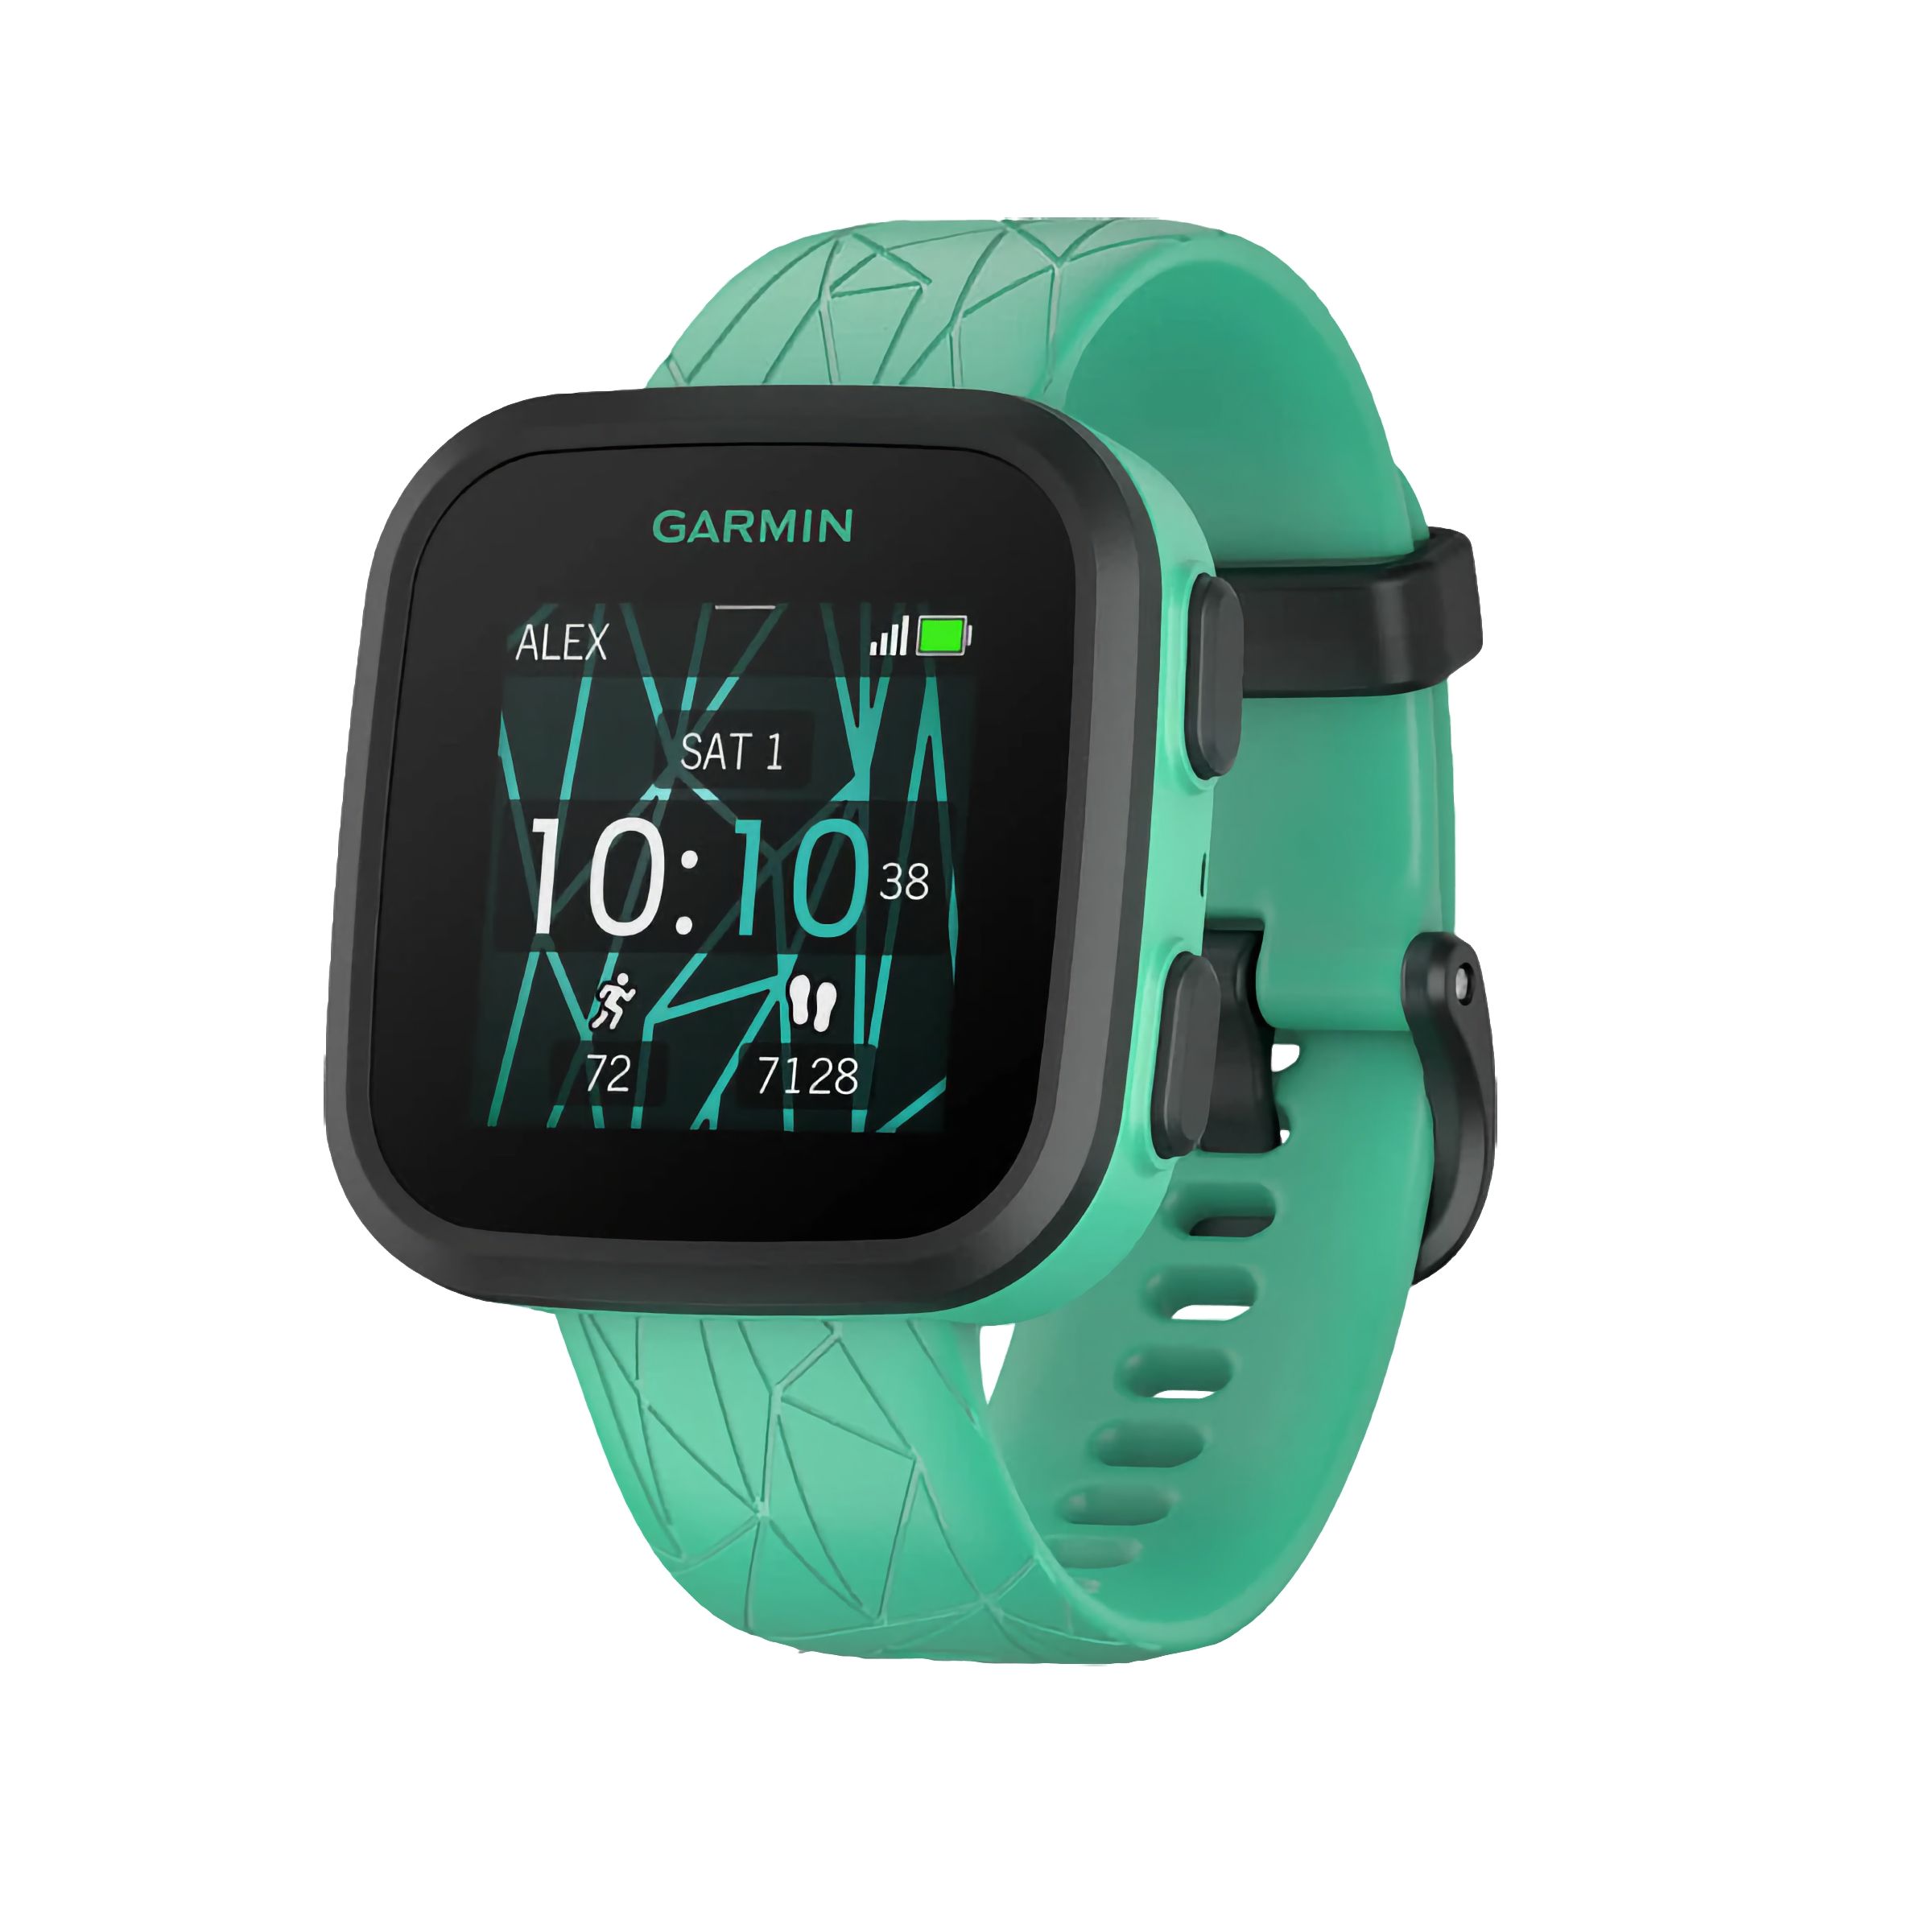 A green square smartwatch with a simple display.